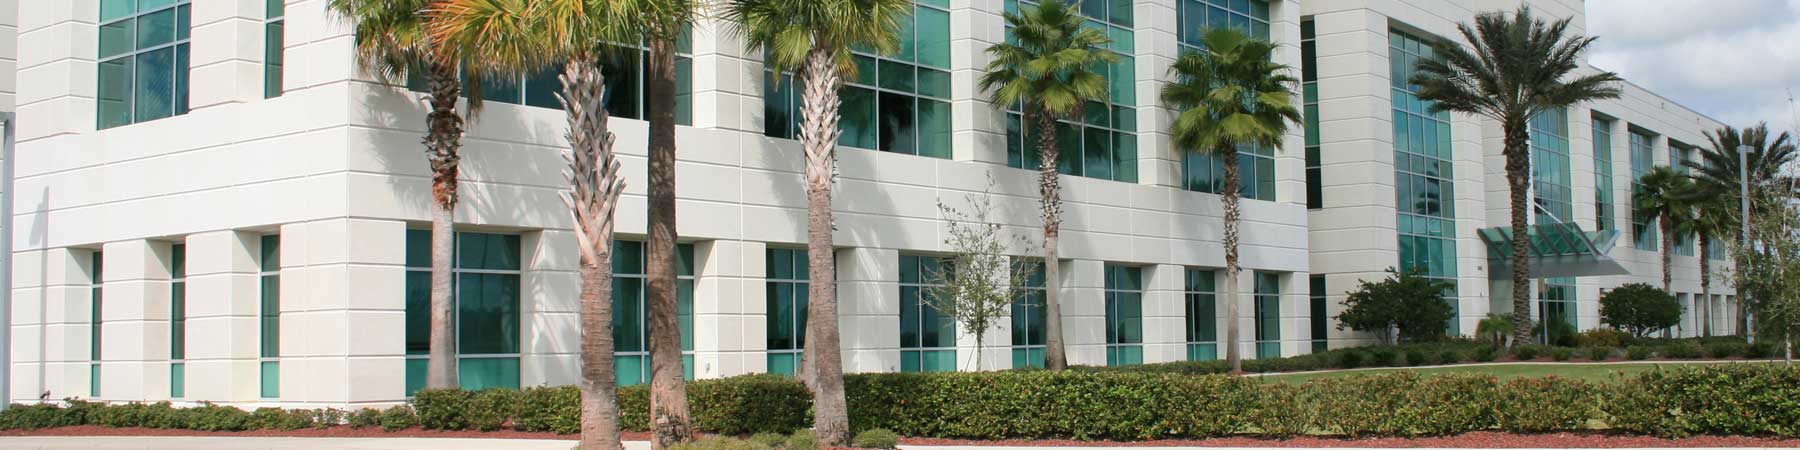 Florida Commerical Building Mulch